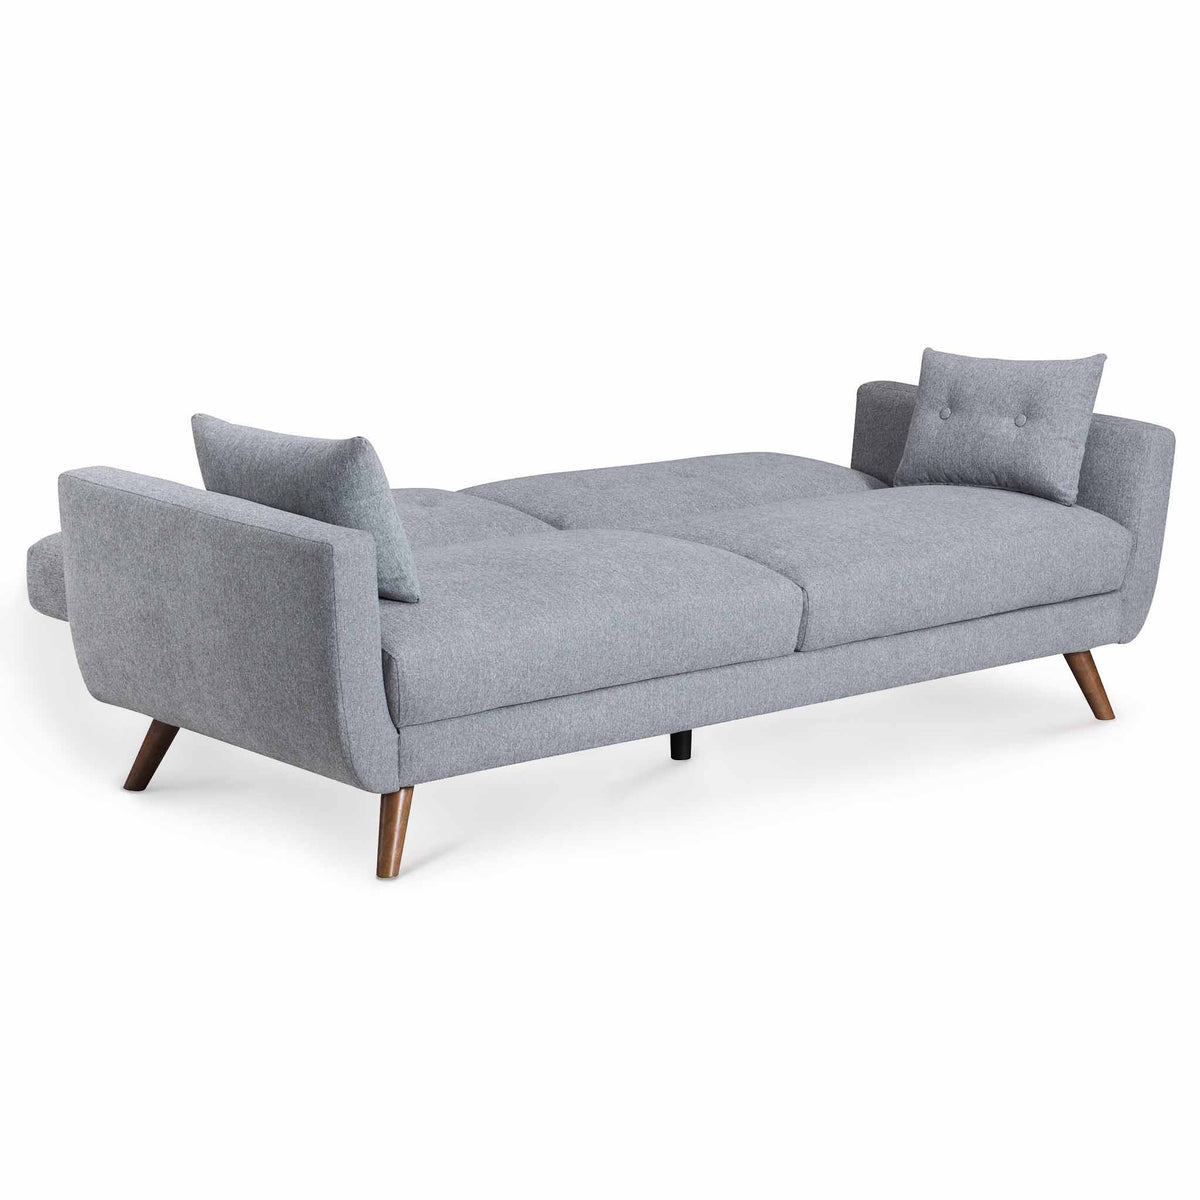 Trom Grey 3 Seater Sofa Bed - Back down for sofa bed